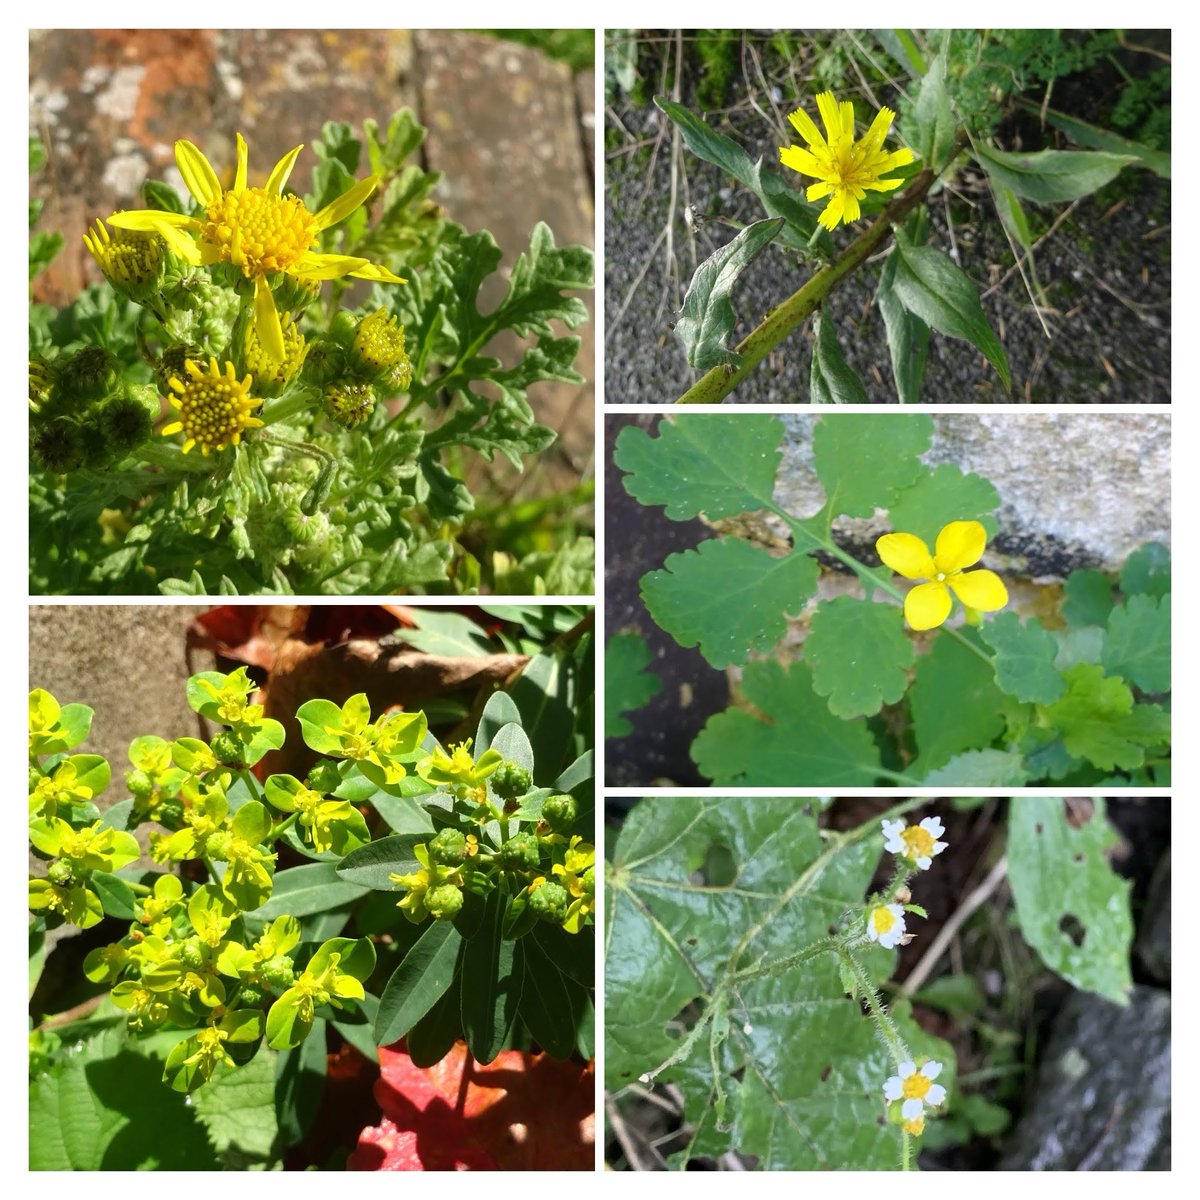 Some sunshine for #WildflowerHour: Common Ragwort, Hawkweed, Greater Celandine, Shaggy Soldier, and escaped Balkan Spurge